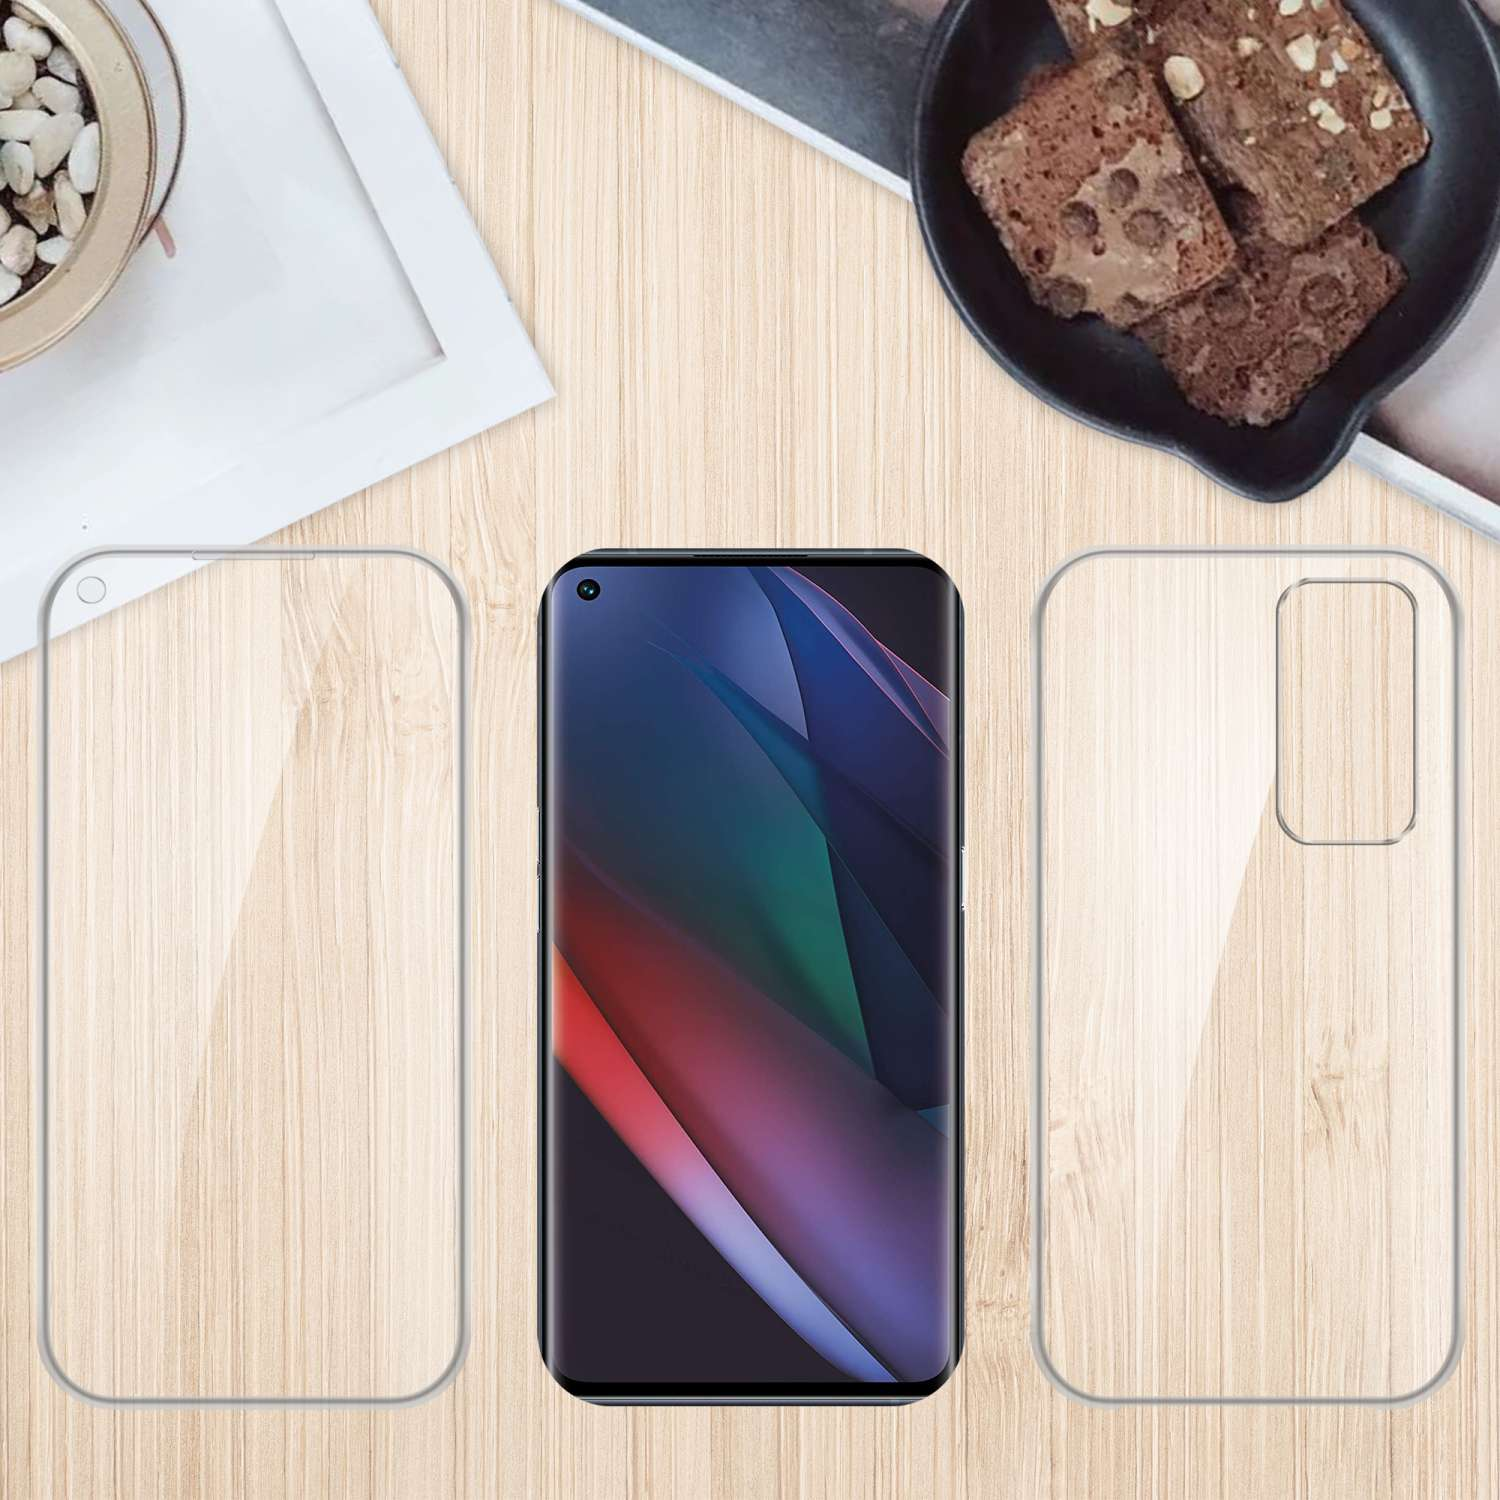 360 Hülle, Oppo, Backcover, Grad FIND Case CADORABO NEO, TPU X3 TRANSPARENT